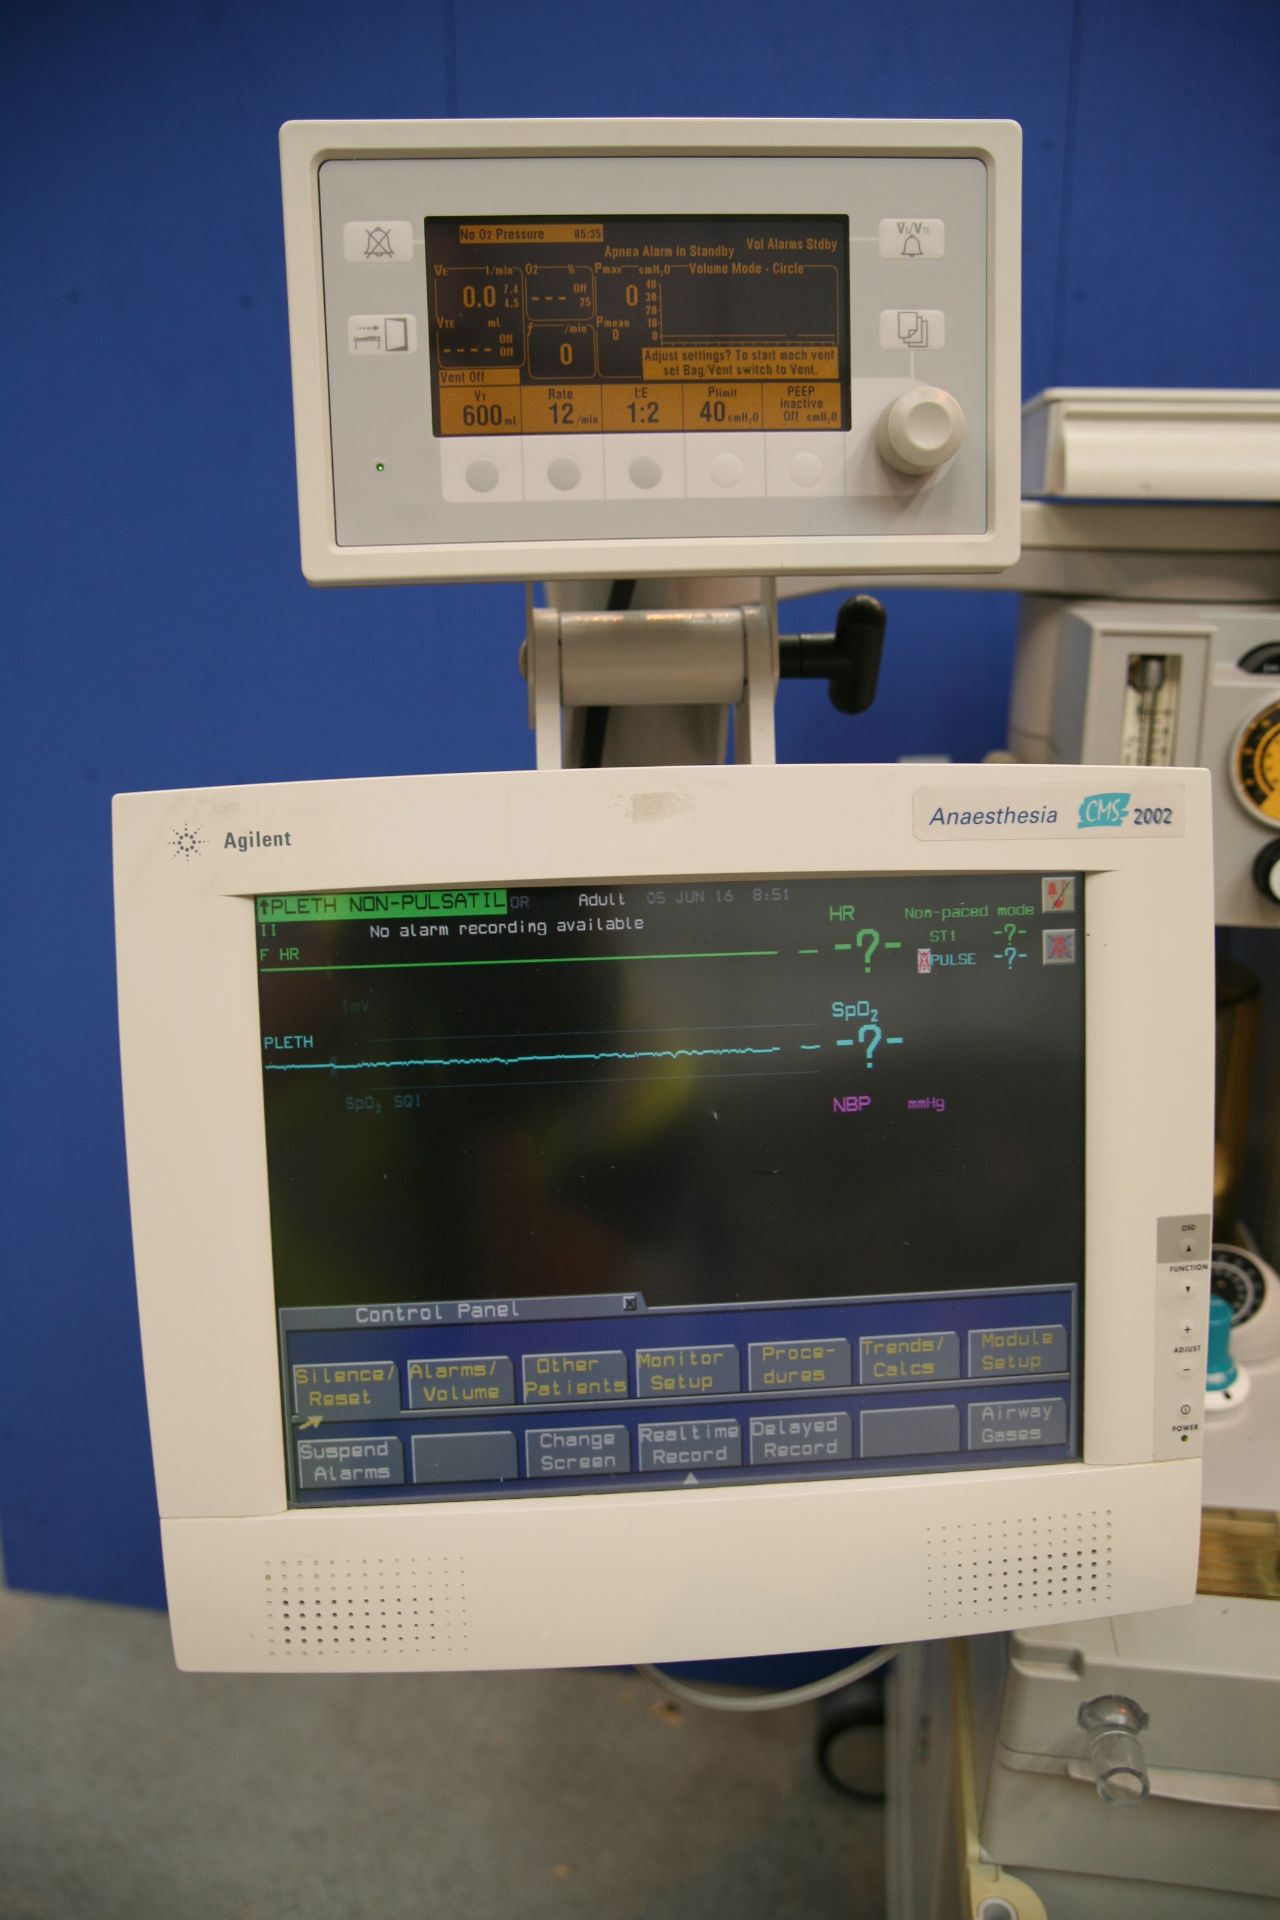 Datex Ohmeda Aestiva 5 Anaethesia Trolley With Agilent Anaesthesia CMS 2002 Monitor, Smart Vent, - Image 2 of 6